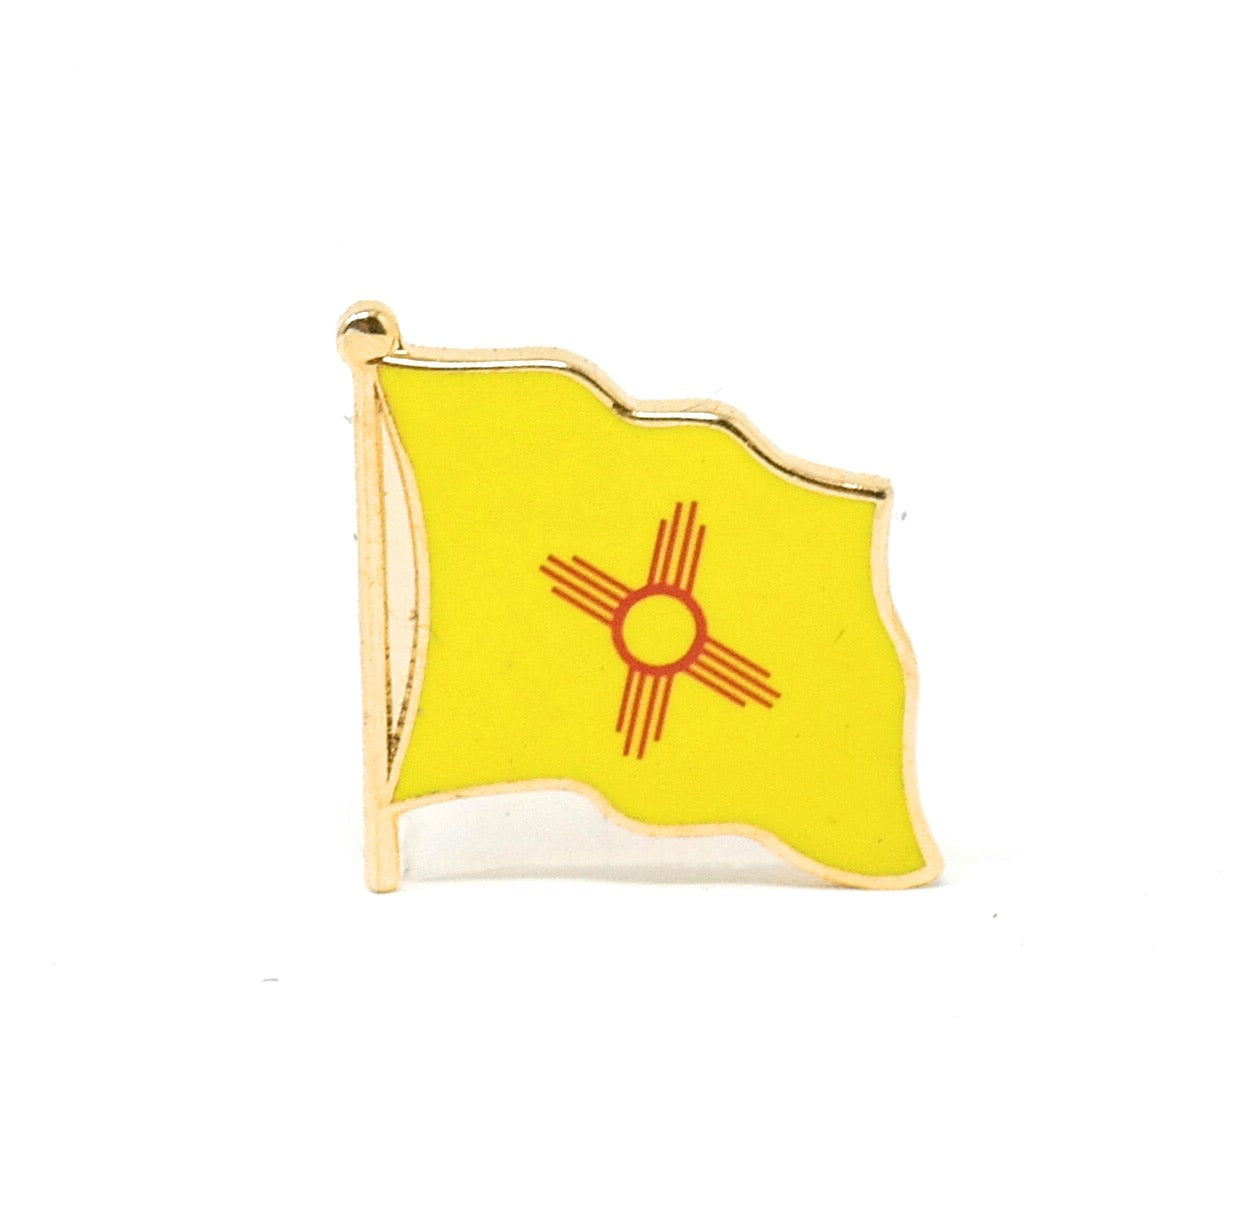 New Mexico State Lapel Pin